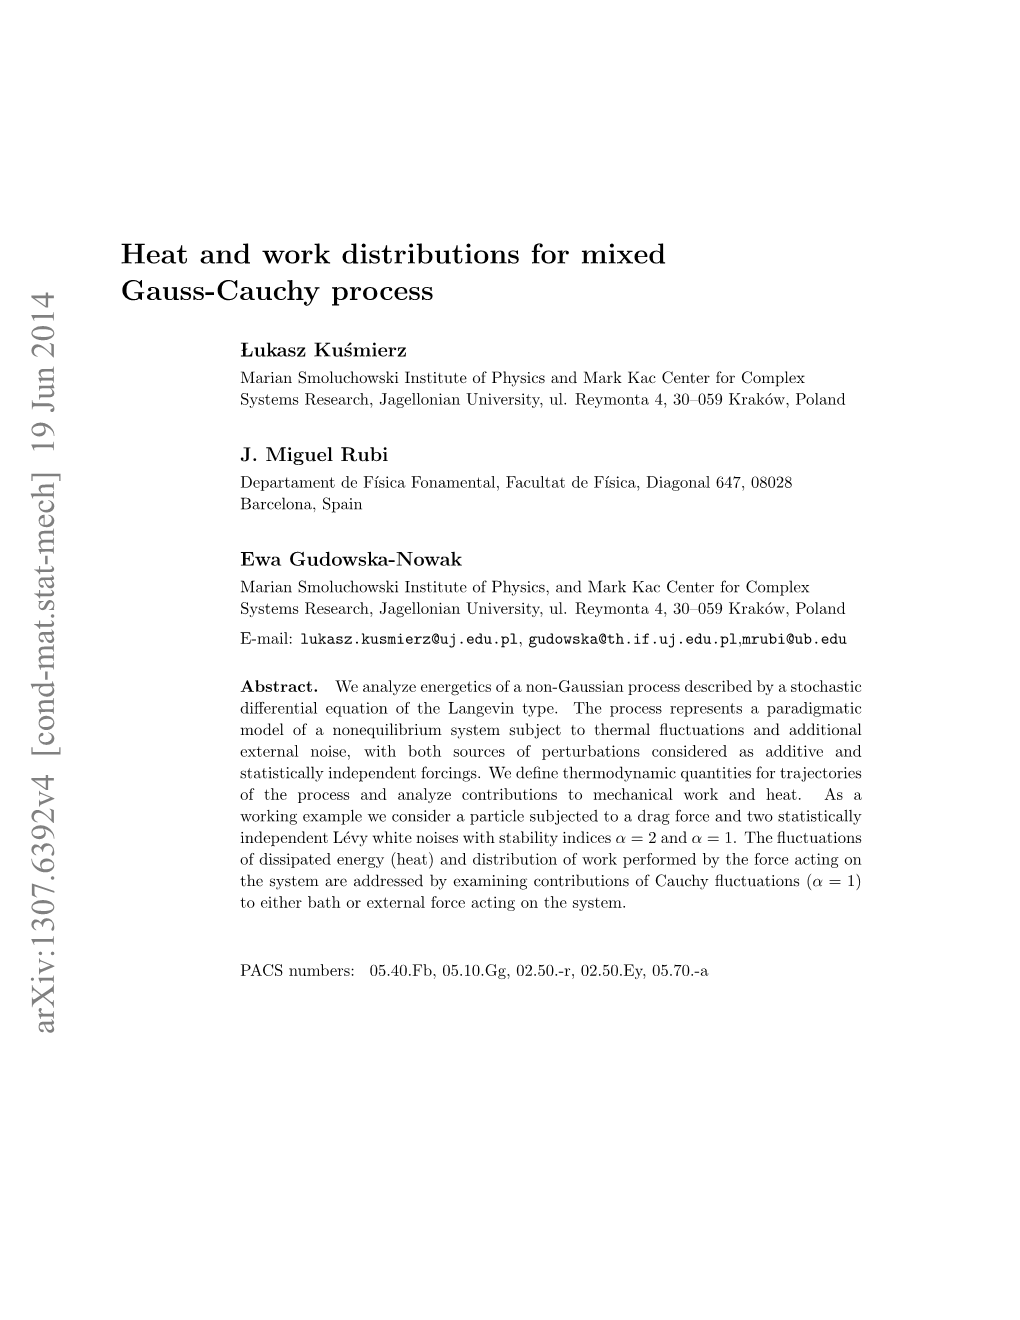 Heat and Work Distributions for Mixed Gauss-Cauchy Process